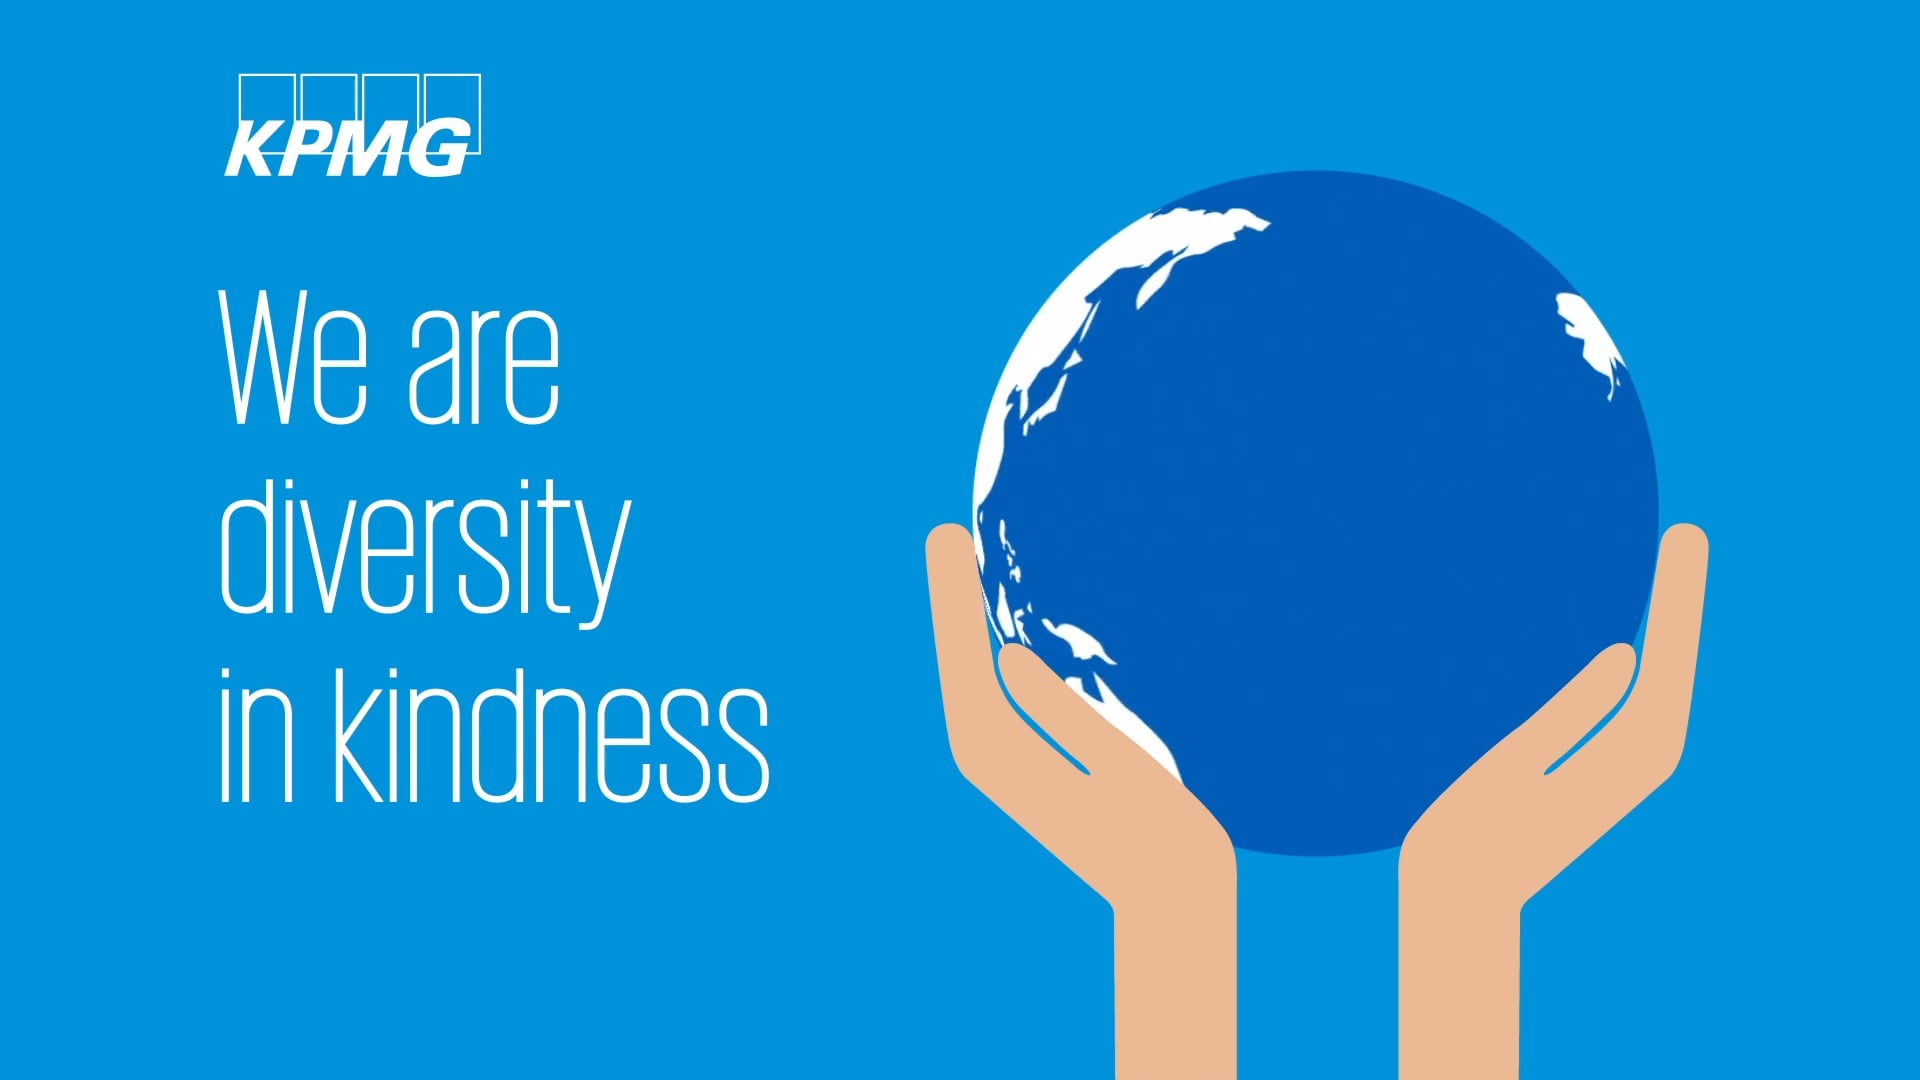 KPMG Luxembourg "Diversity in Kindness" - Motion & sound design